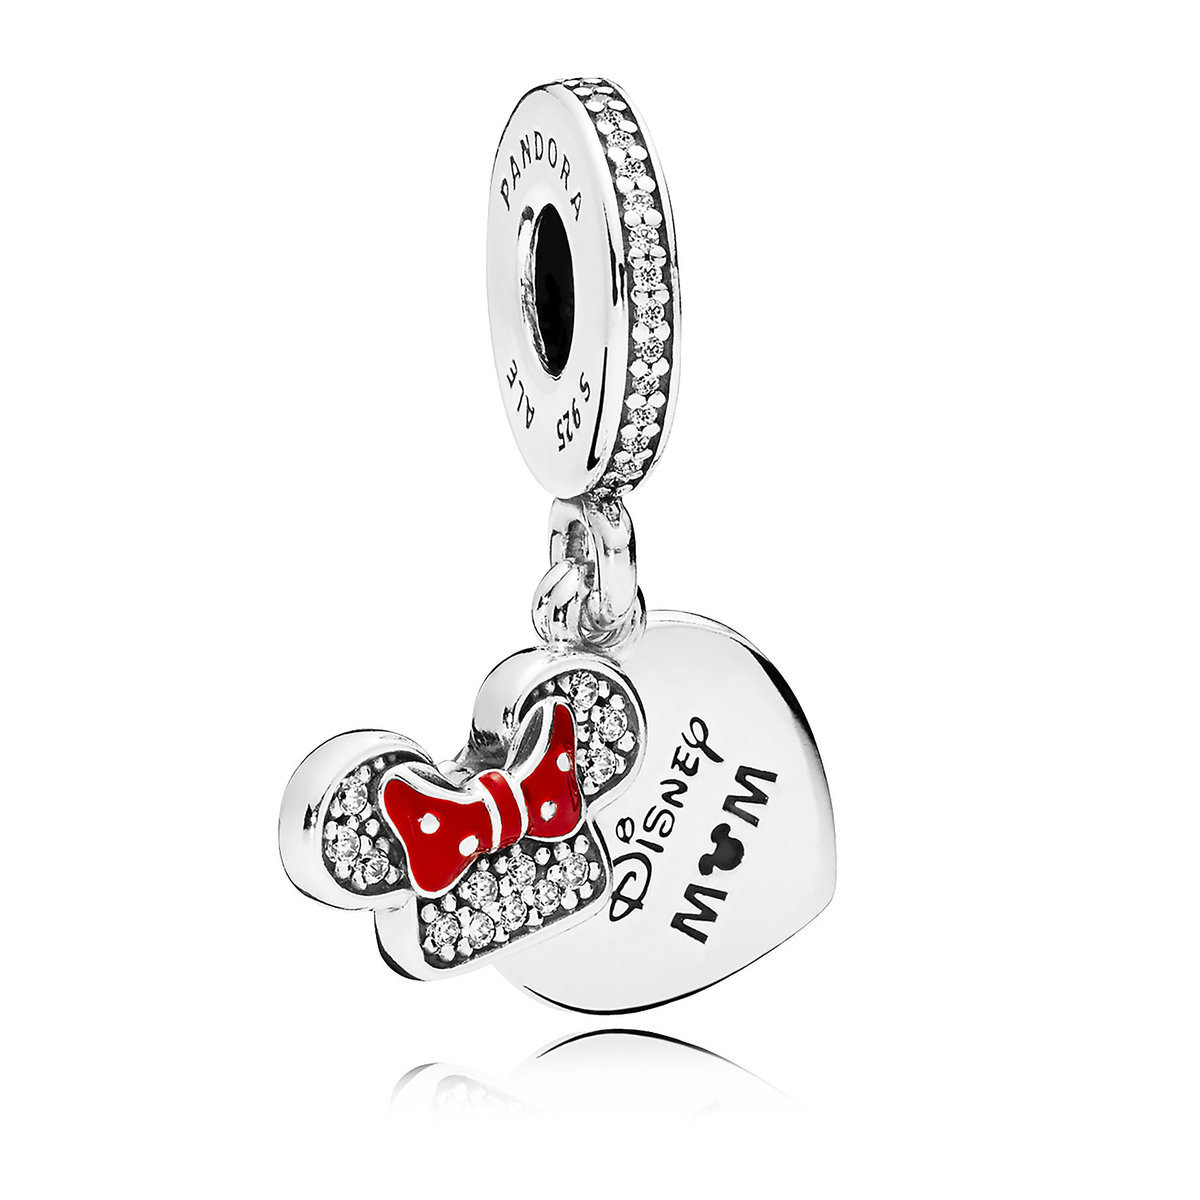 Two New Disney PANDORA Charms Released